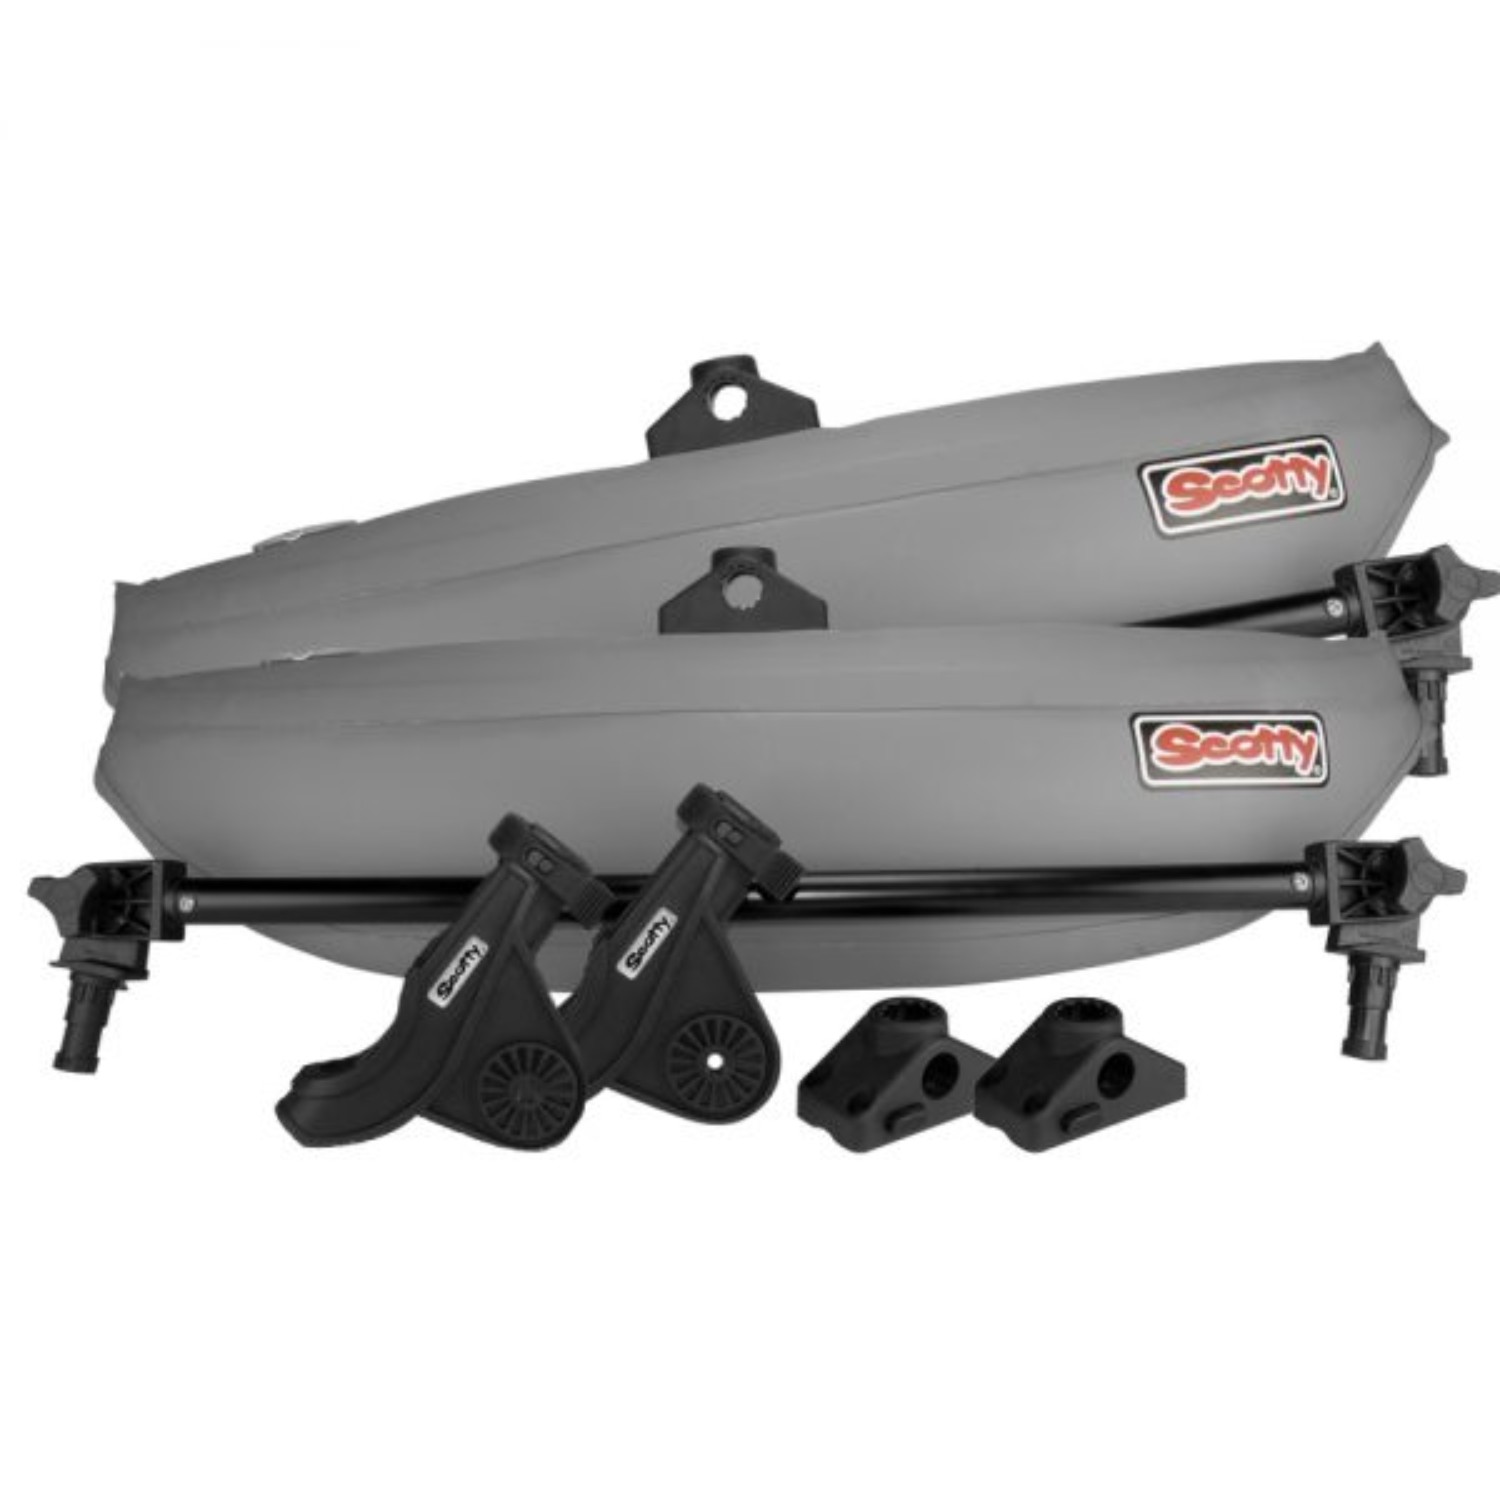 Scotty 302 Kayak Stabilizer System 0302 , 36% Off with Free S&H — CampSaver